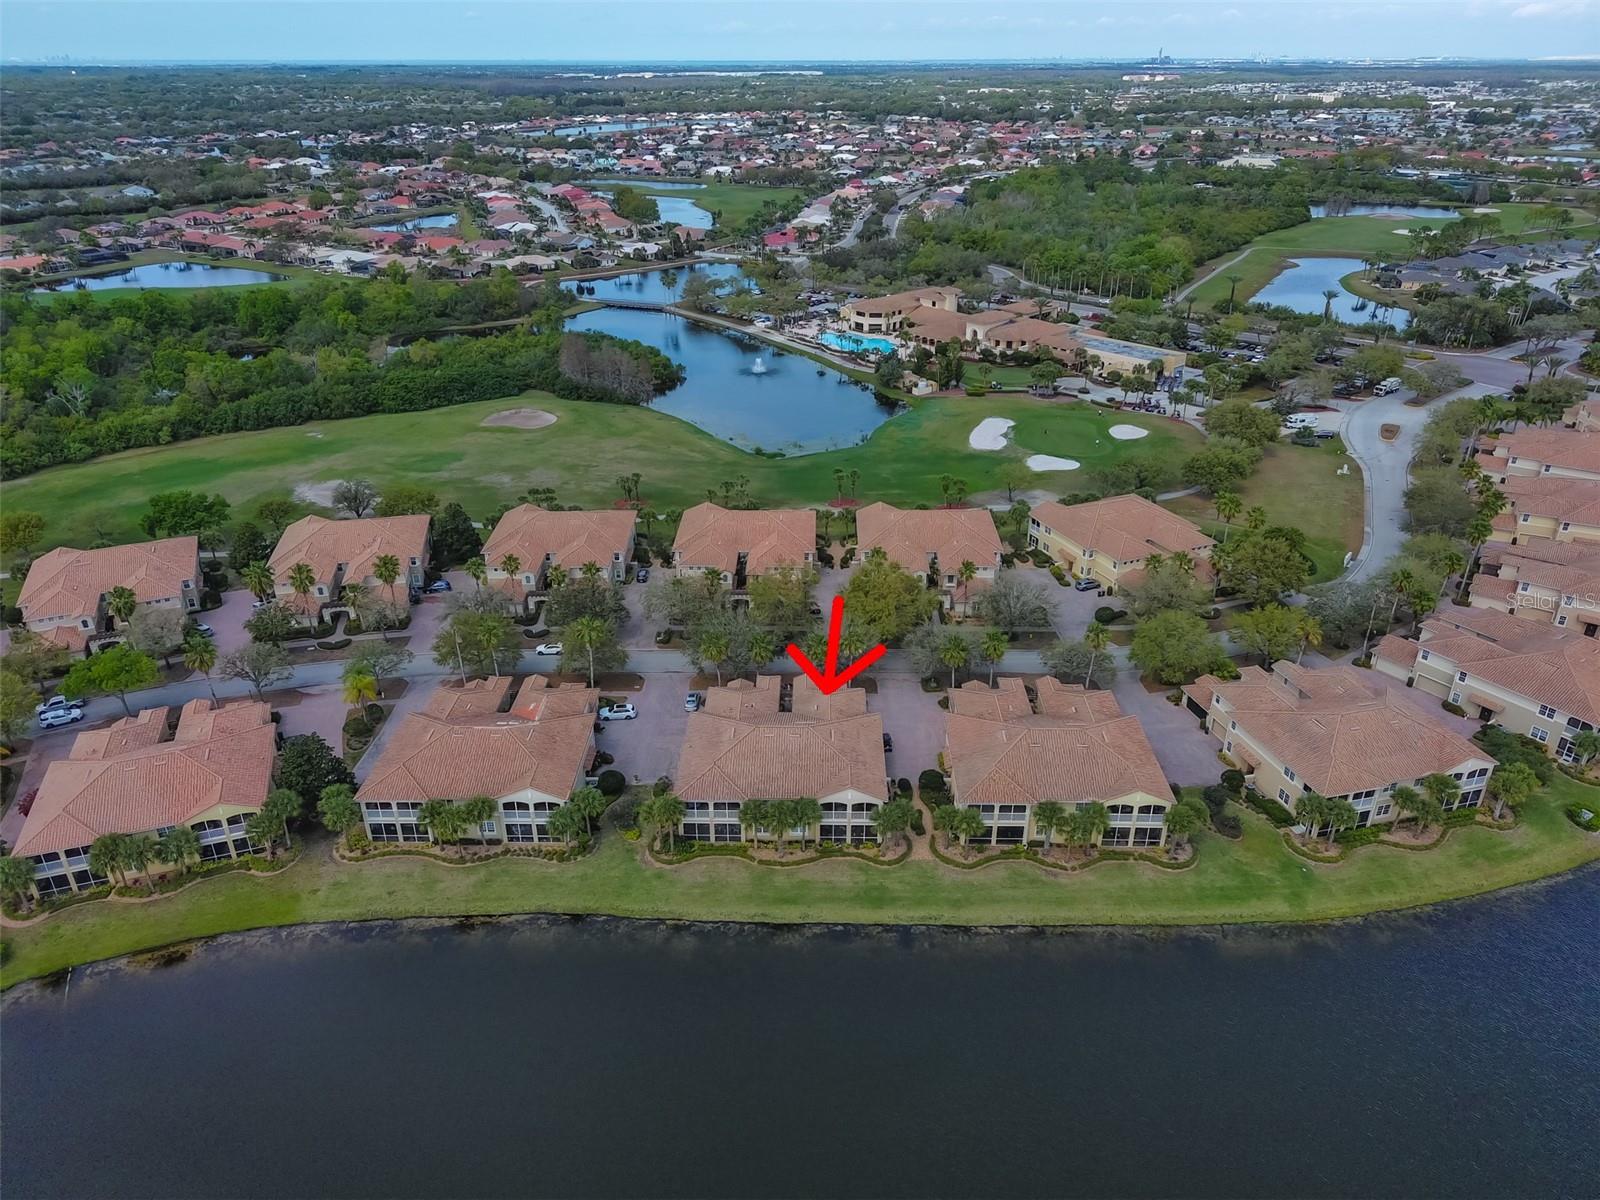 Aerial water view of condo community and the Renaissance Golf and Country Club.